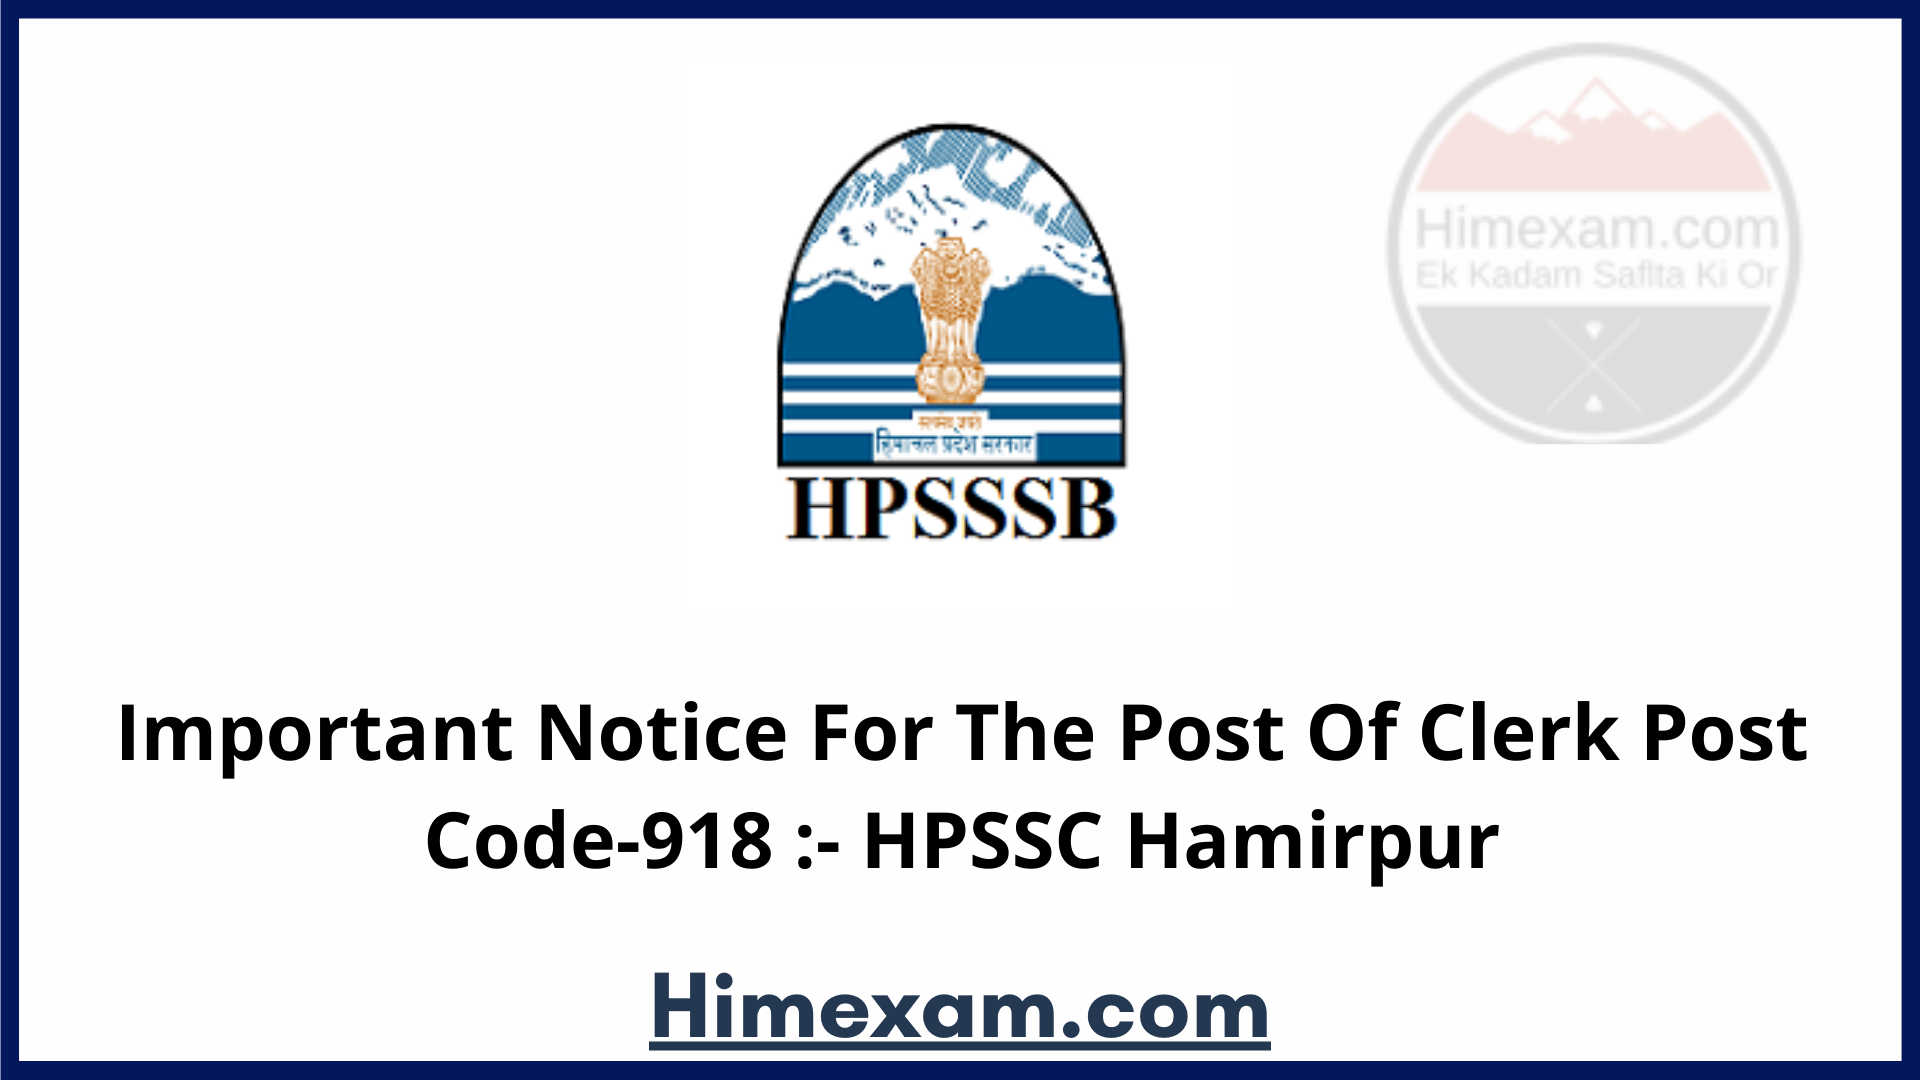 Important Notice For The Post Of Clerk Post Code-918 :- HPSSC Hamirpur